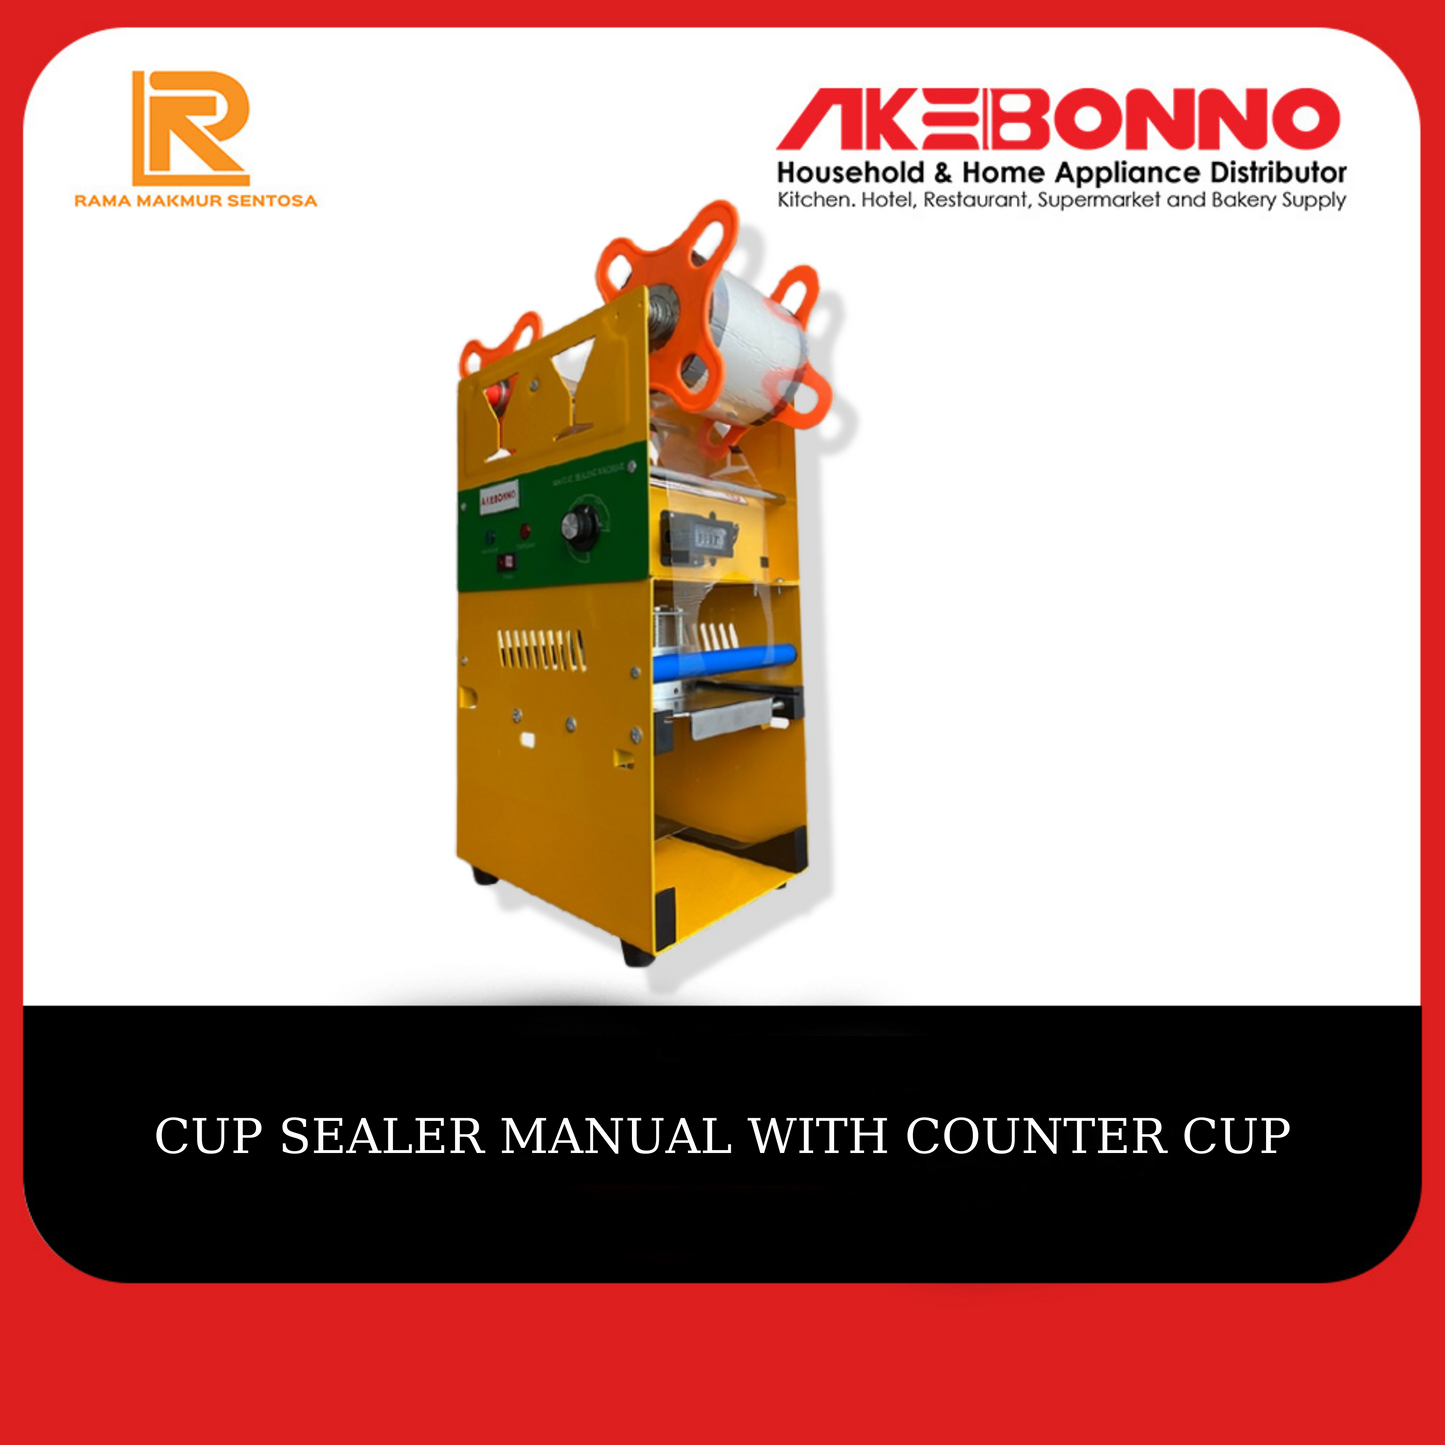 CUP SEALER MANUAL WITH COUNTER CUP